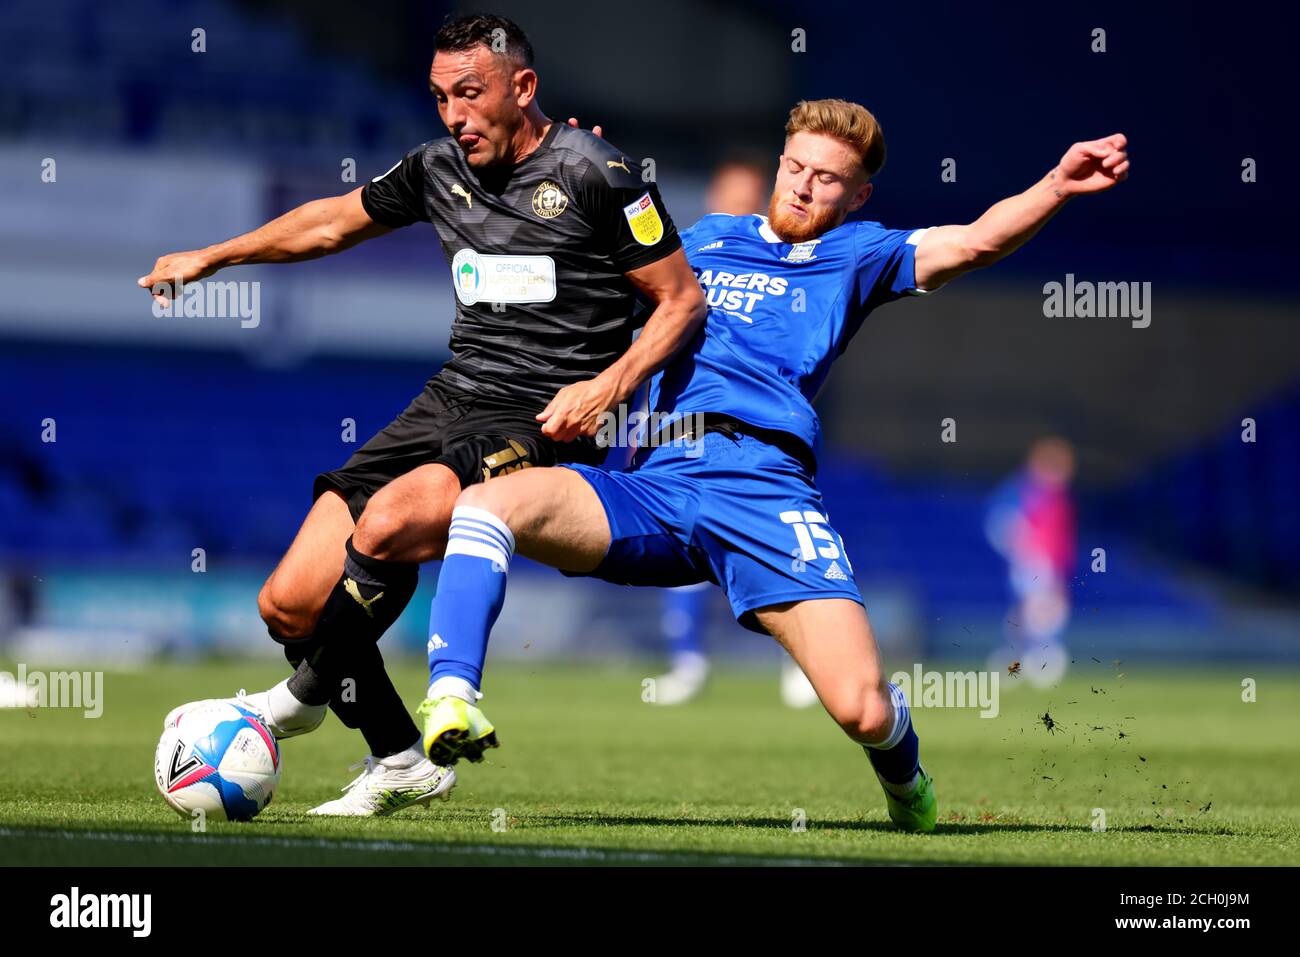 13th September 2020; Portman Road, Ipswich, Suffolk, England, English League One Footballl, Ipswich Town versus Wigan Athletic; Teddy Bishop of Ipswich Town tackles Gary Roberts of Wigan Athletic Stock Photo